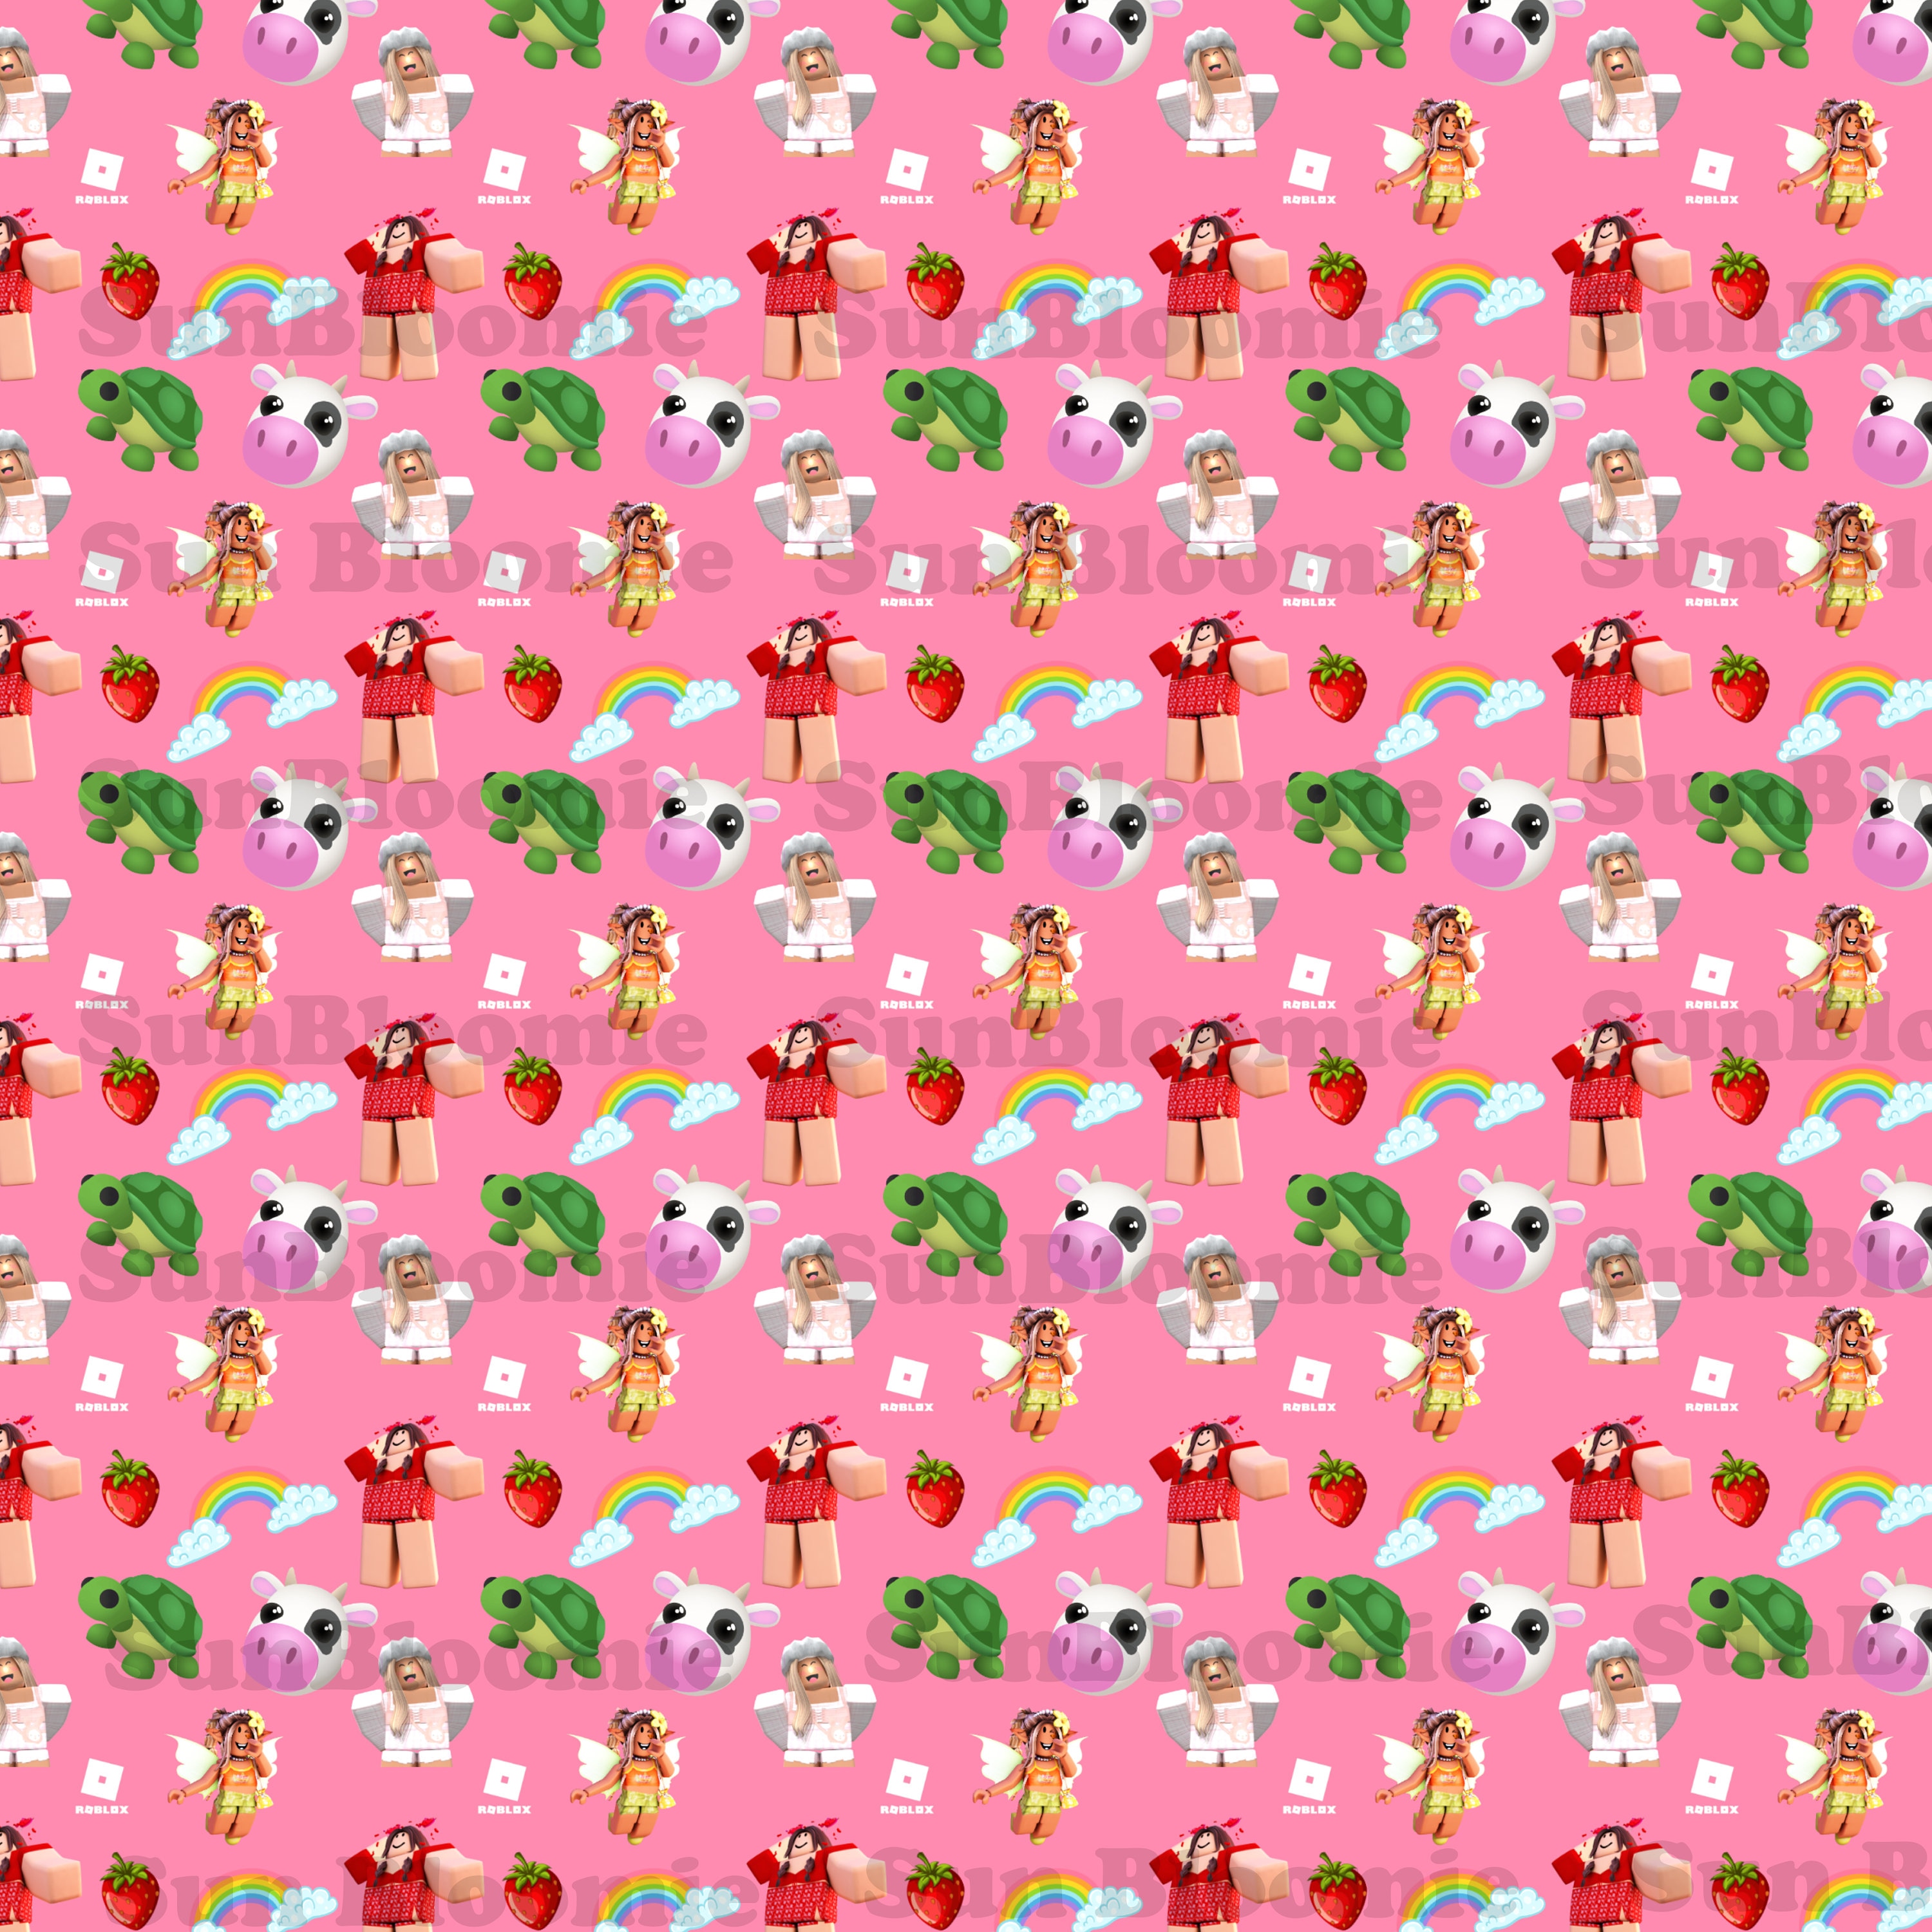 Roblox Girl Seamless Pattern for your Gamer Girl. Roblox Pattern for  crafting, fabrics, scrapbooking, etc.